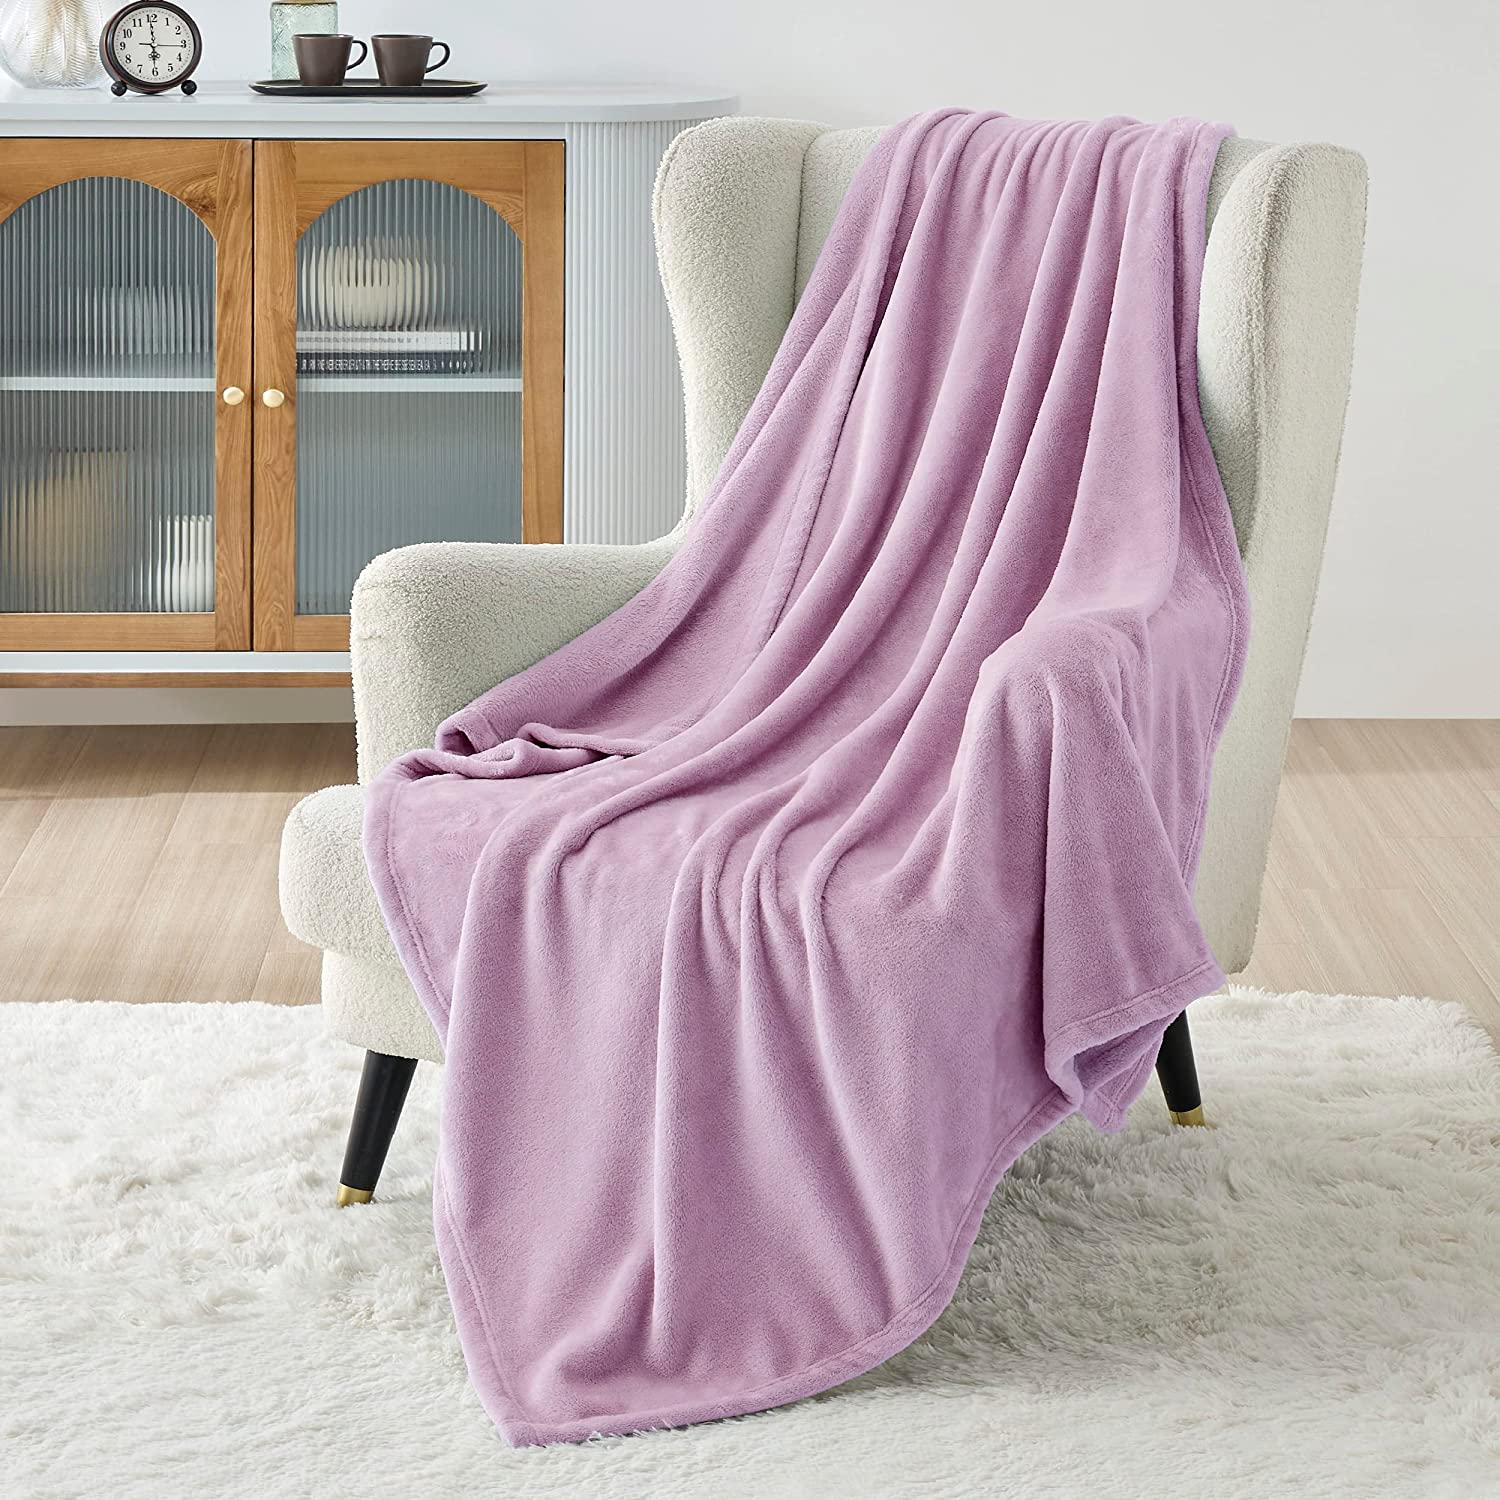 BEDSURE Fleece Throw Blanket for Couch Grey - Lightweight Plush Fuzzy Cozy  Soft